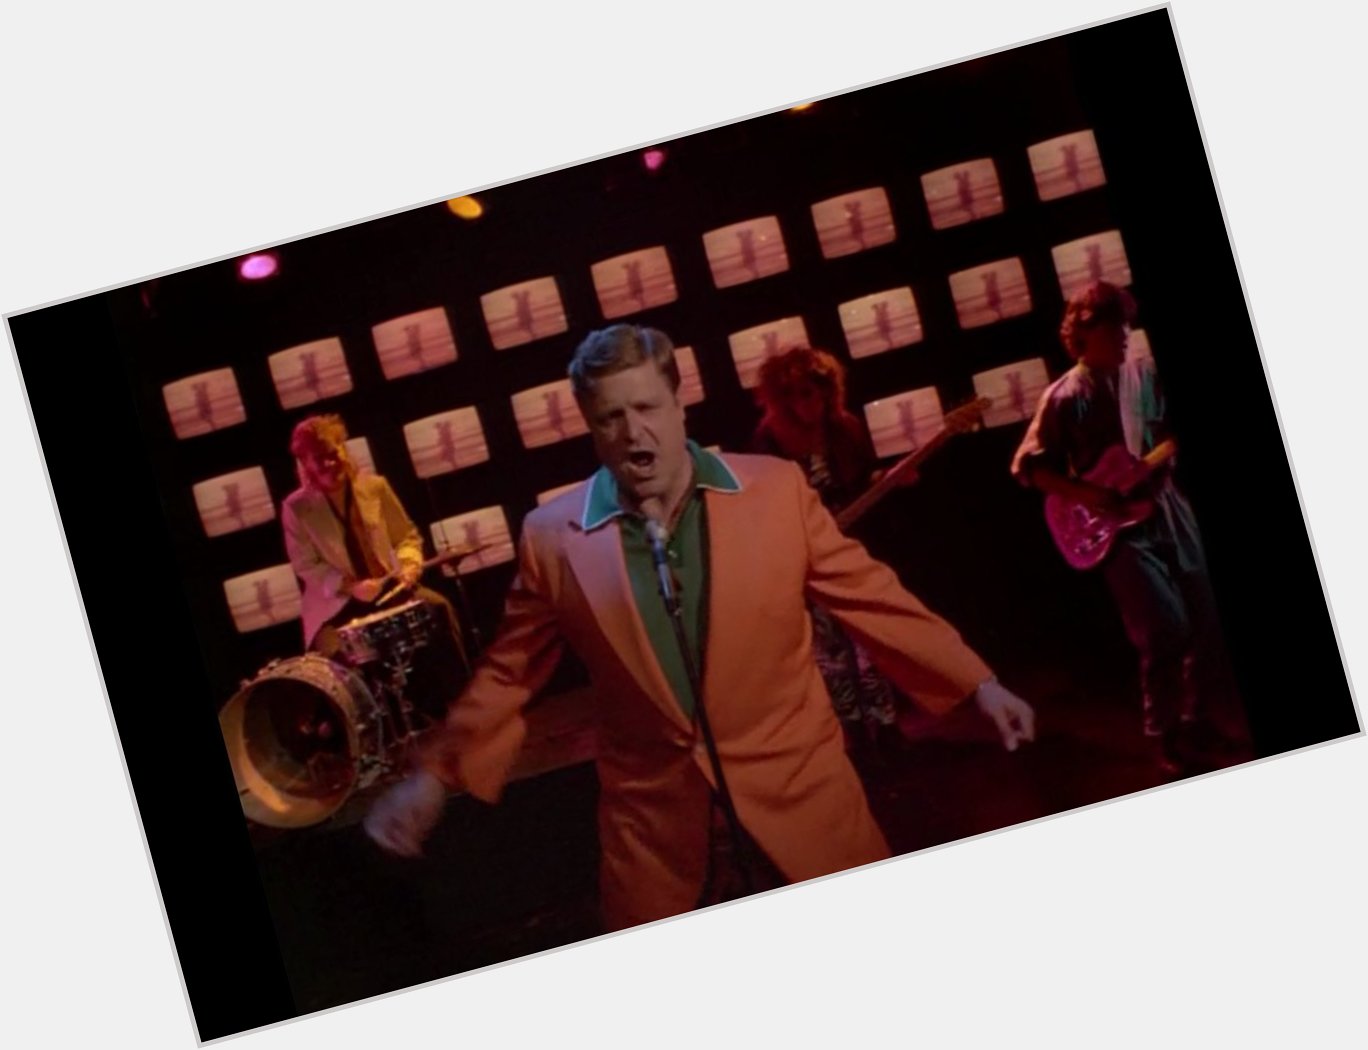 Happy 70th birthday John Goodman best known for appearing in Talking Heads 1986 Wild Wild Life video 